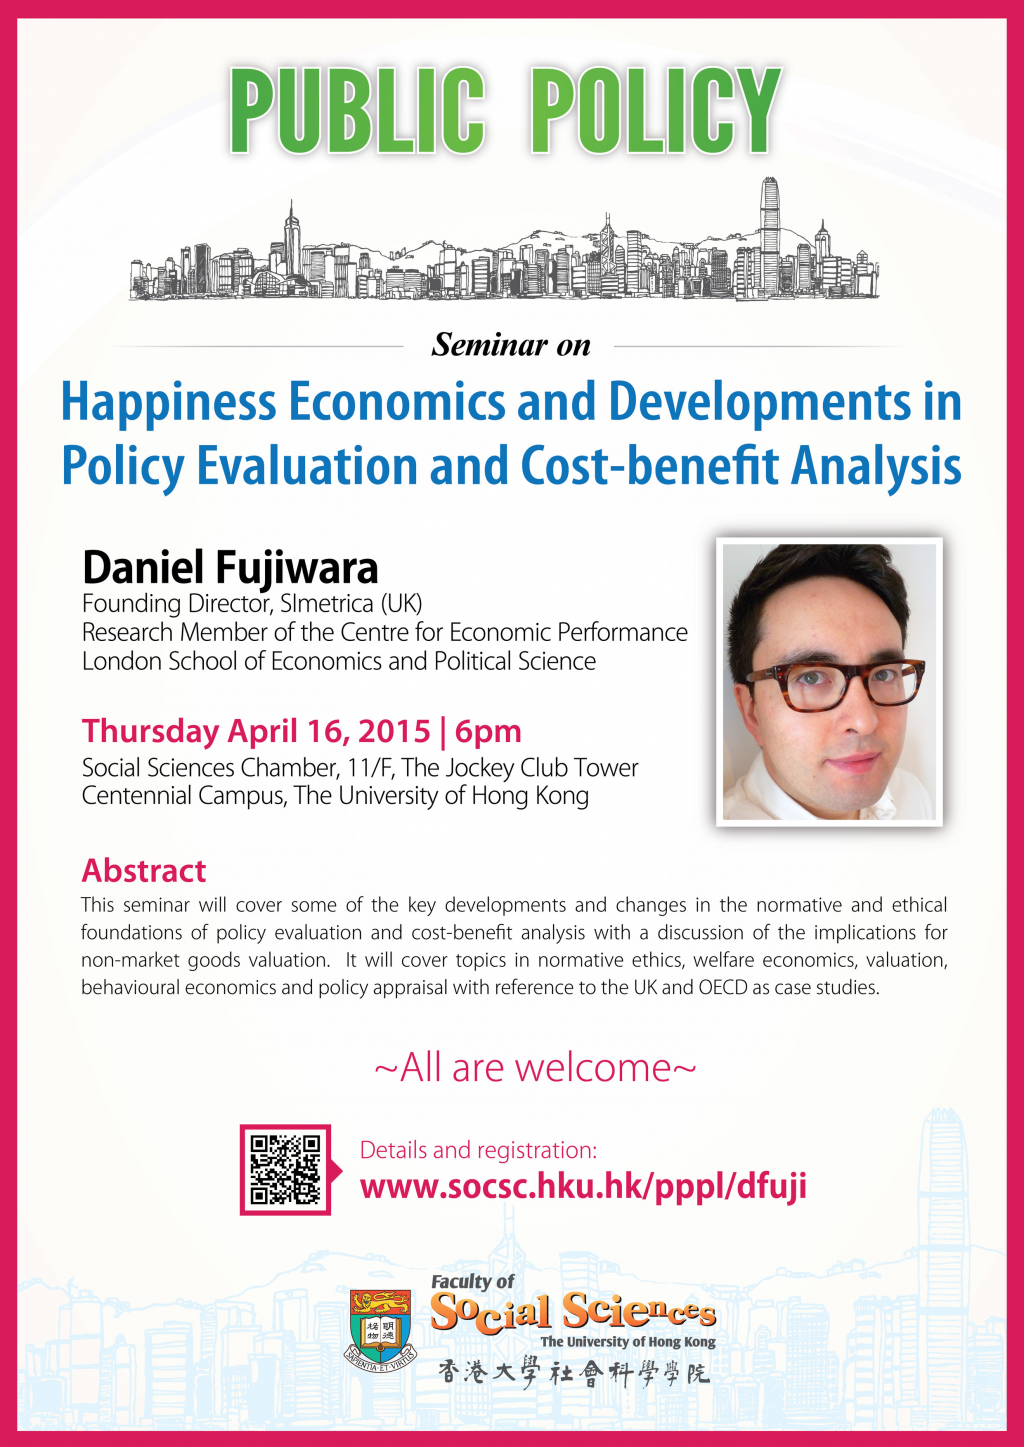 Happiness Economics and Developments in Policy Evalutation and Cost-benefit Analysis